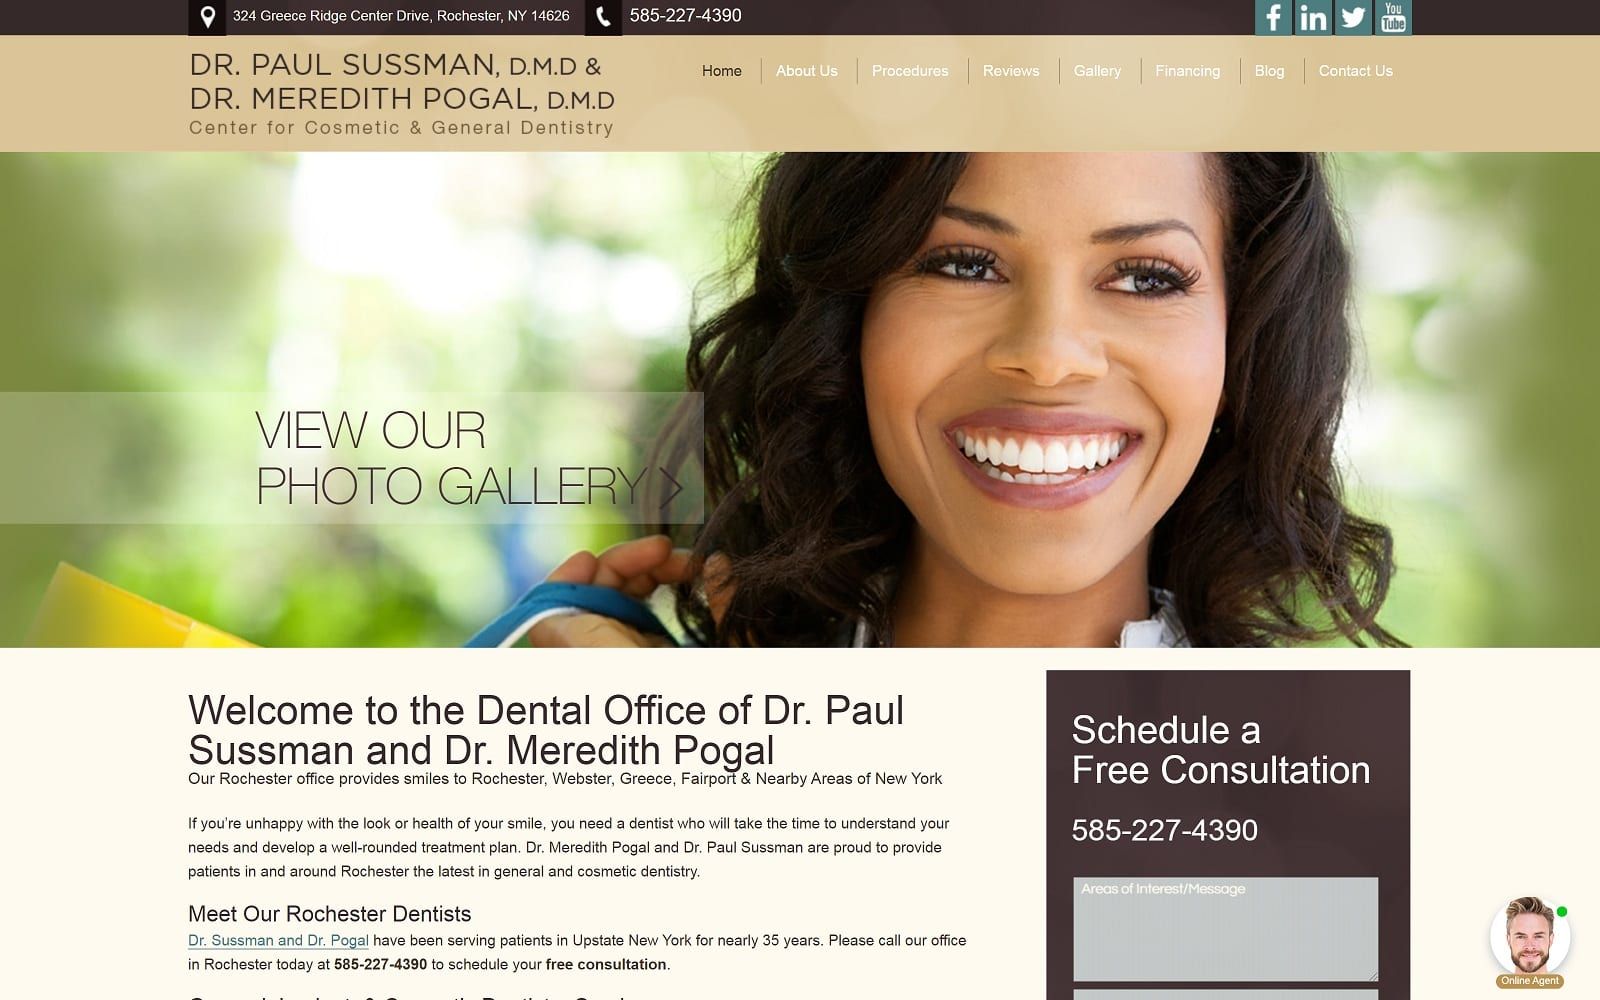 The Screenshot of Center for Cosmetic Dentistry centerforcosmeticdentist.com Dr. Paul Sussman Website